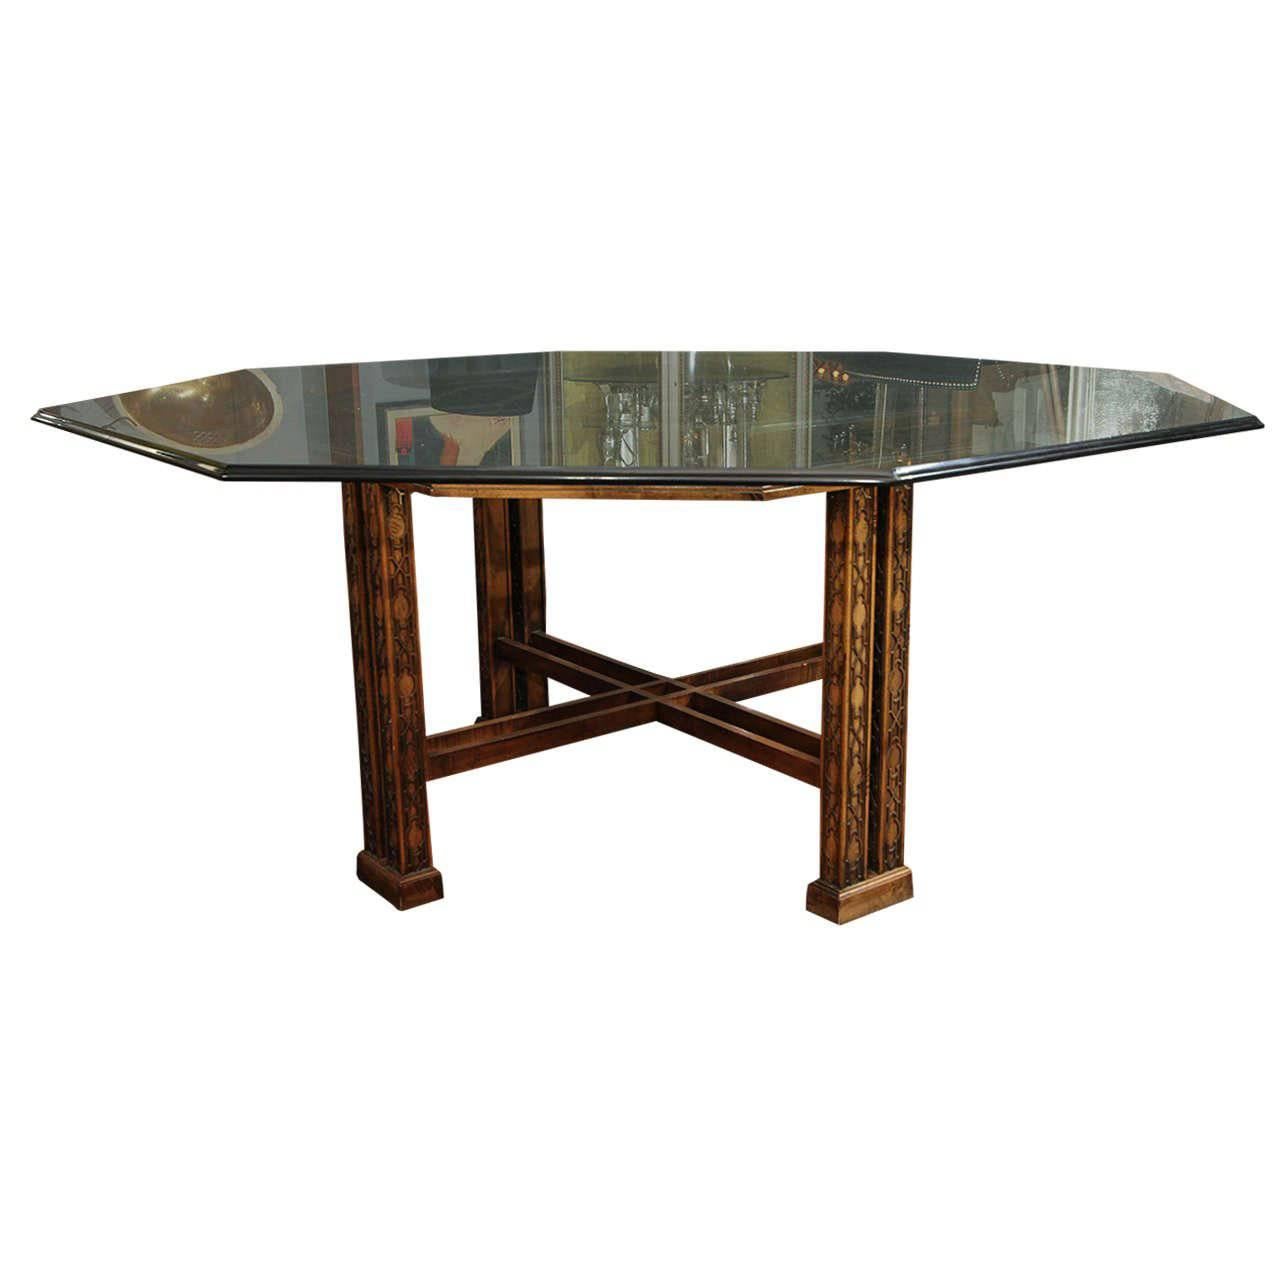 Maguire Chinoiserie Octagonal Table